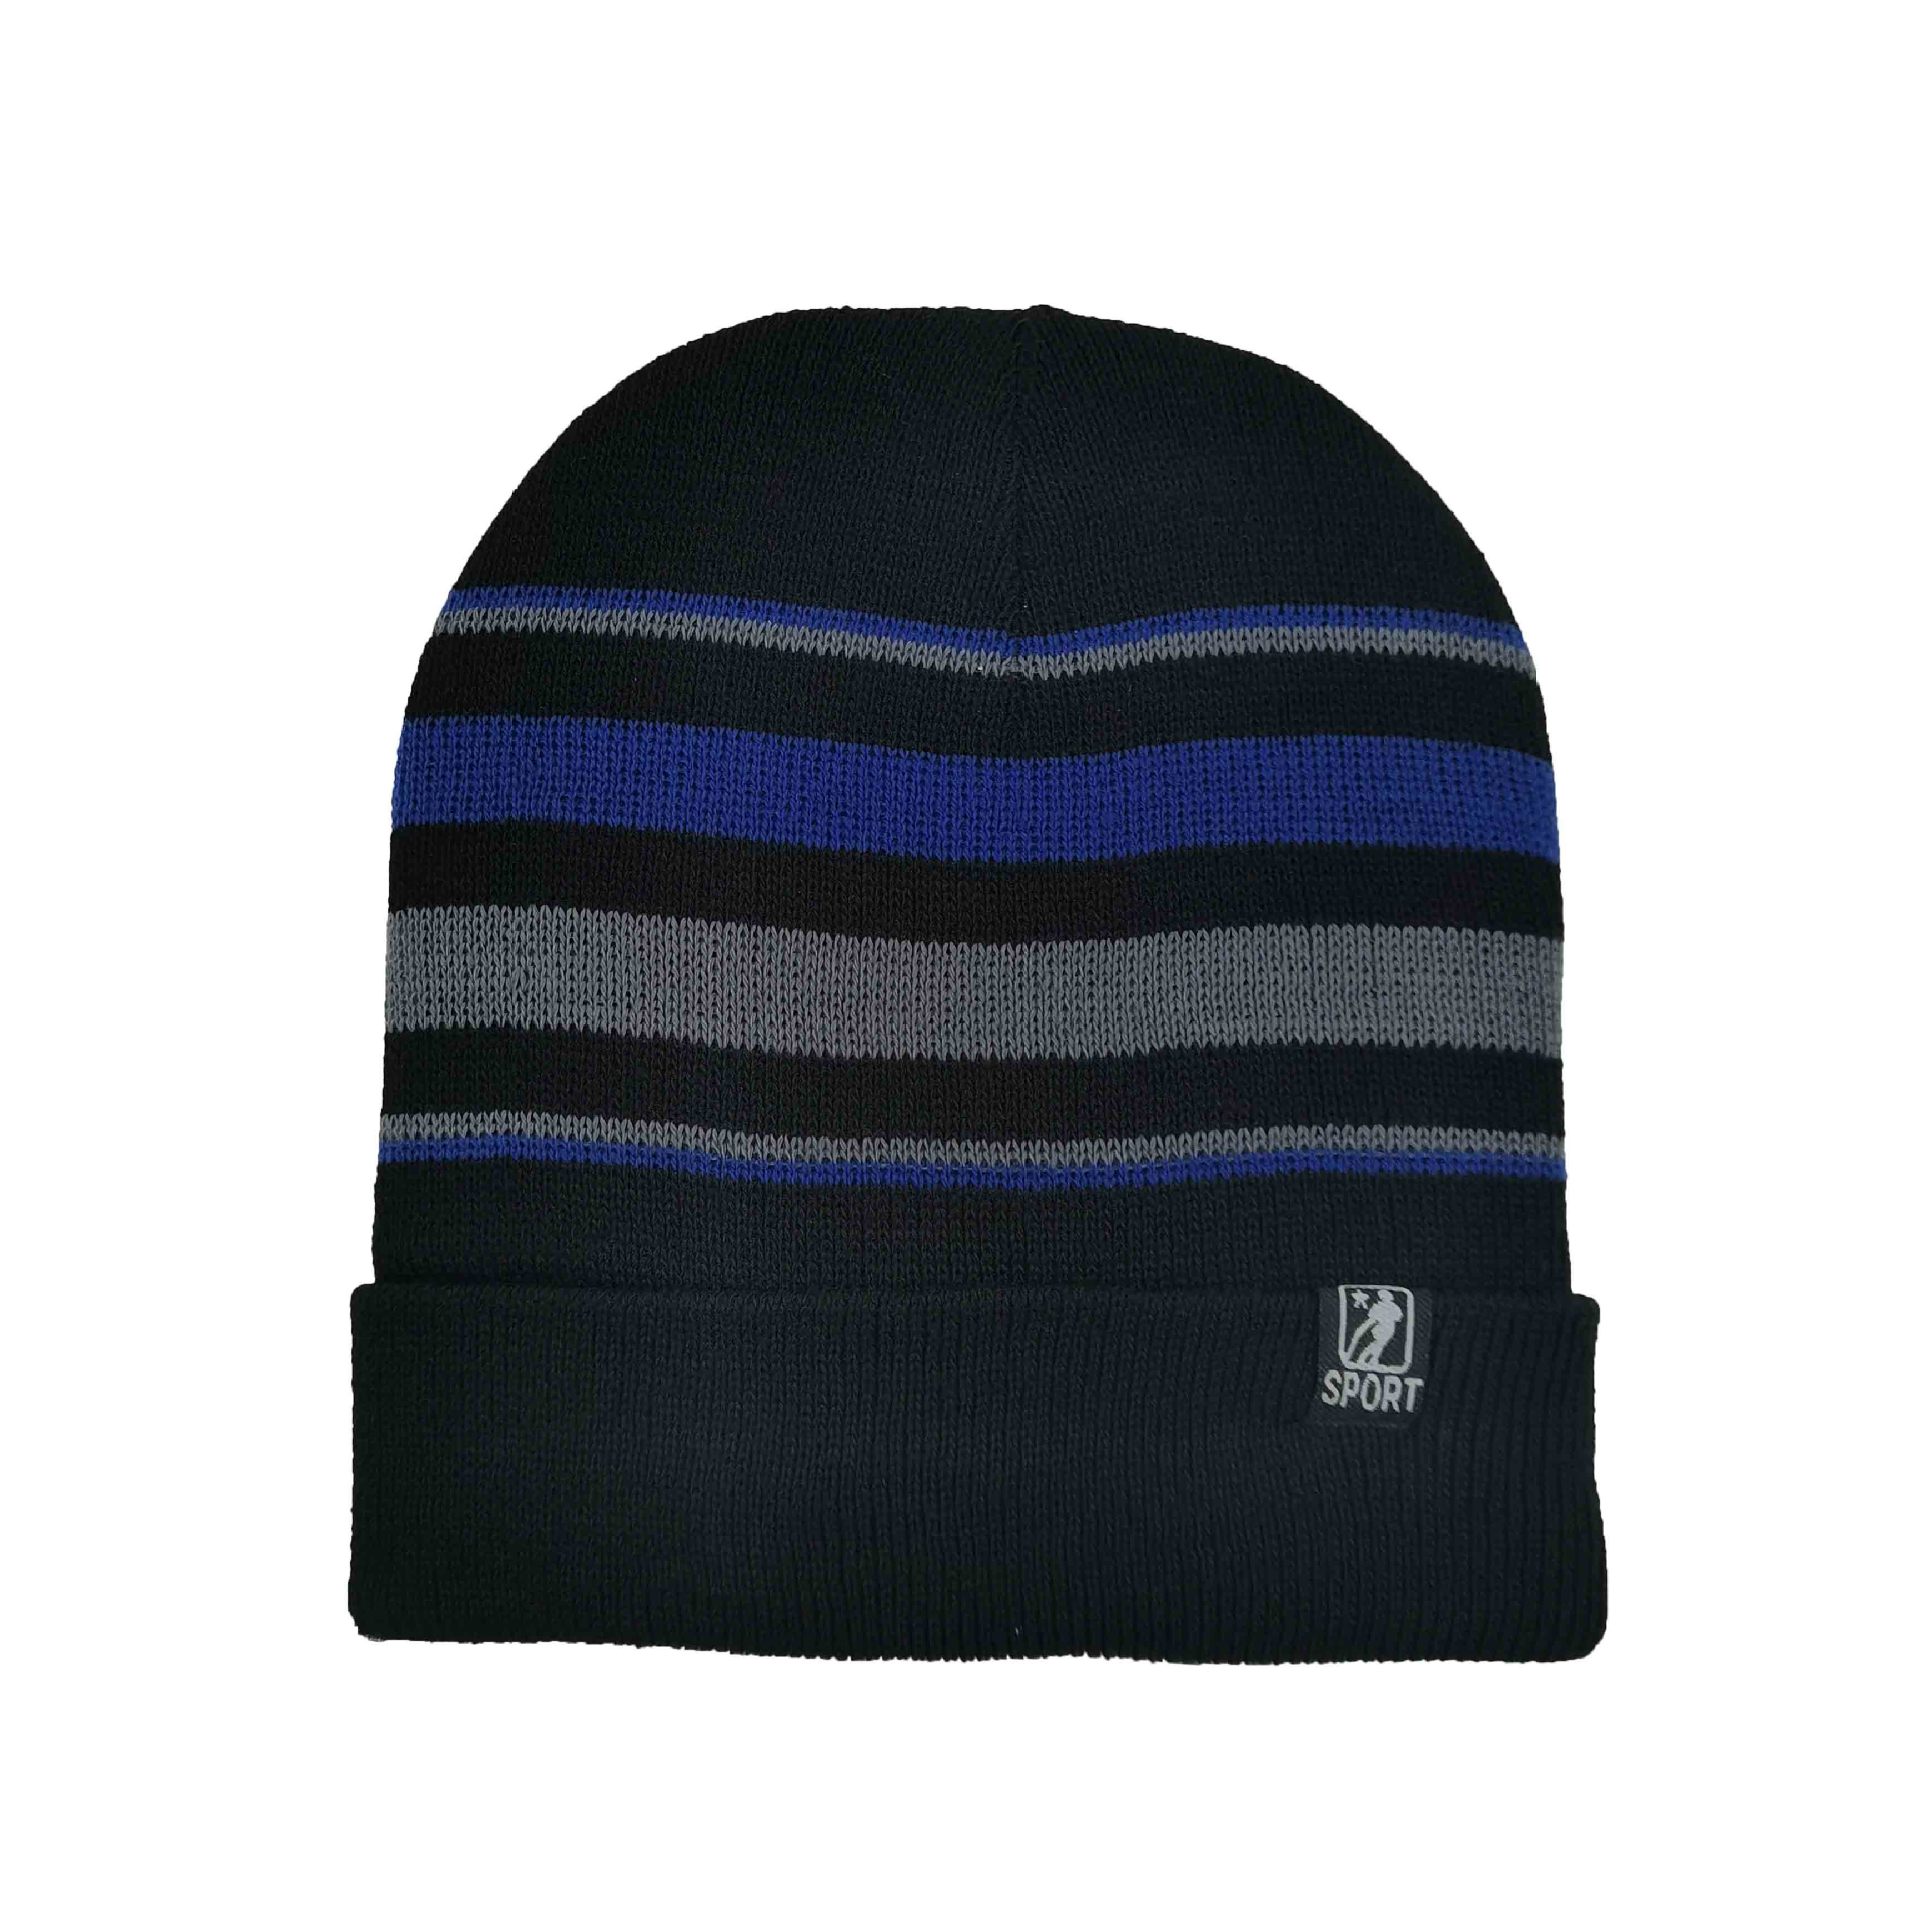 Autumn and Winter New Woolen Cap Lines Knitted Hat Fashionable Warm Thick Windproof Ice Cap Men's Ski Cap